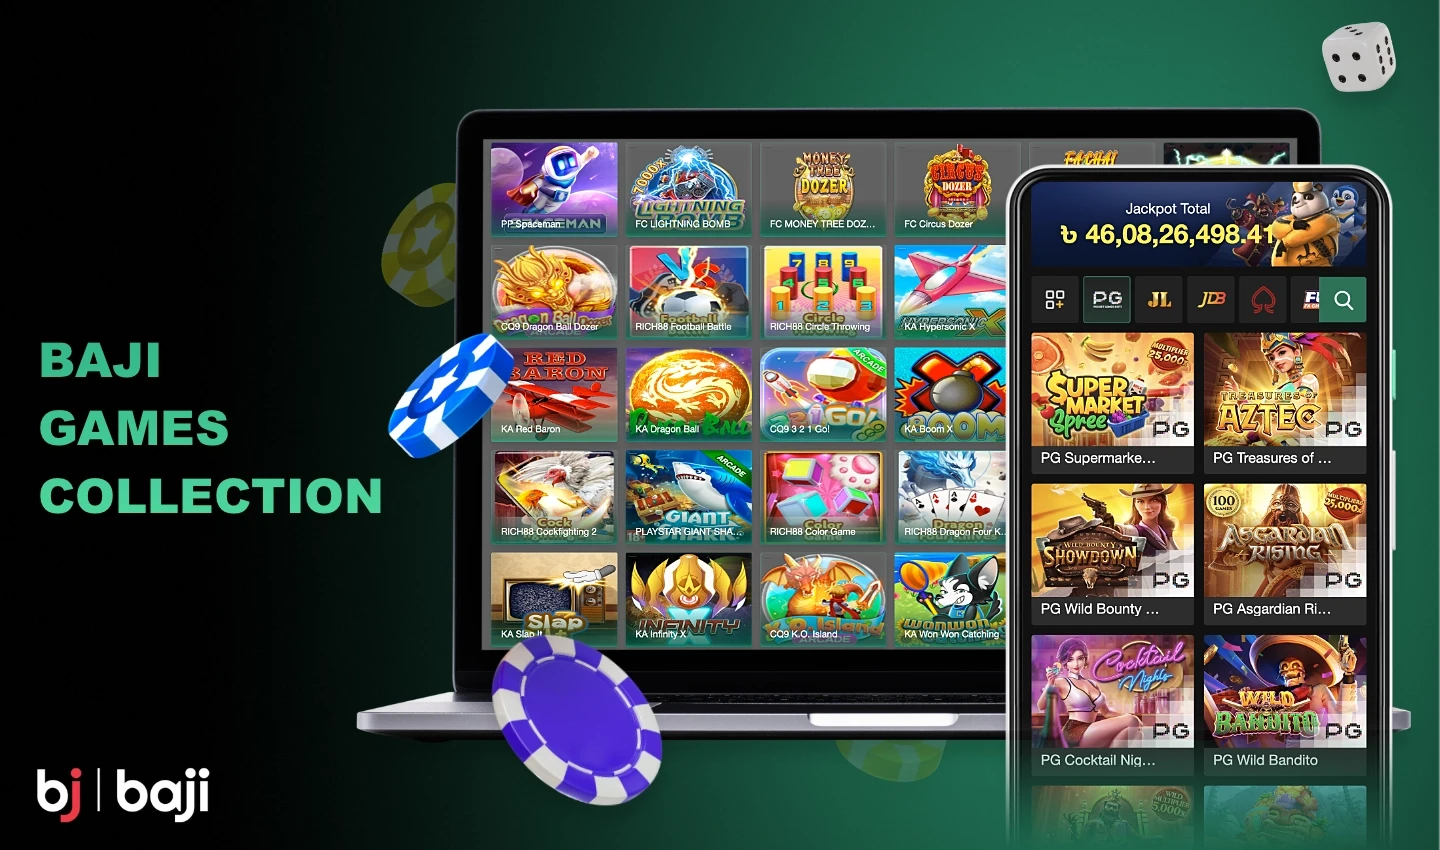 Baji offers a huge collection of licensed gambling games